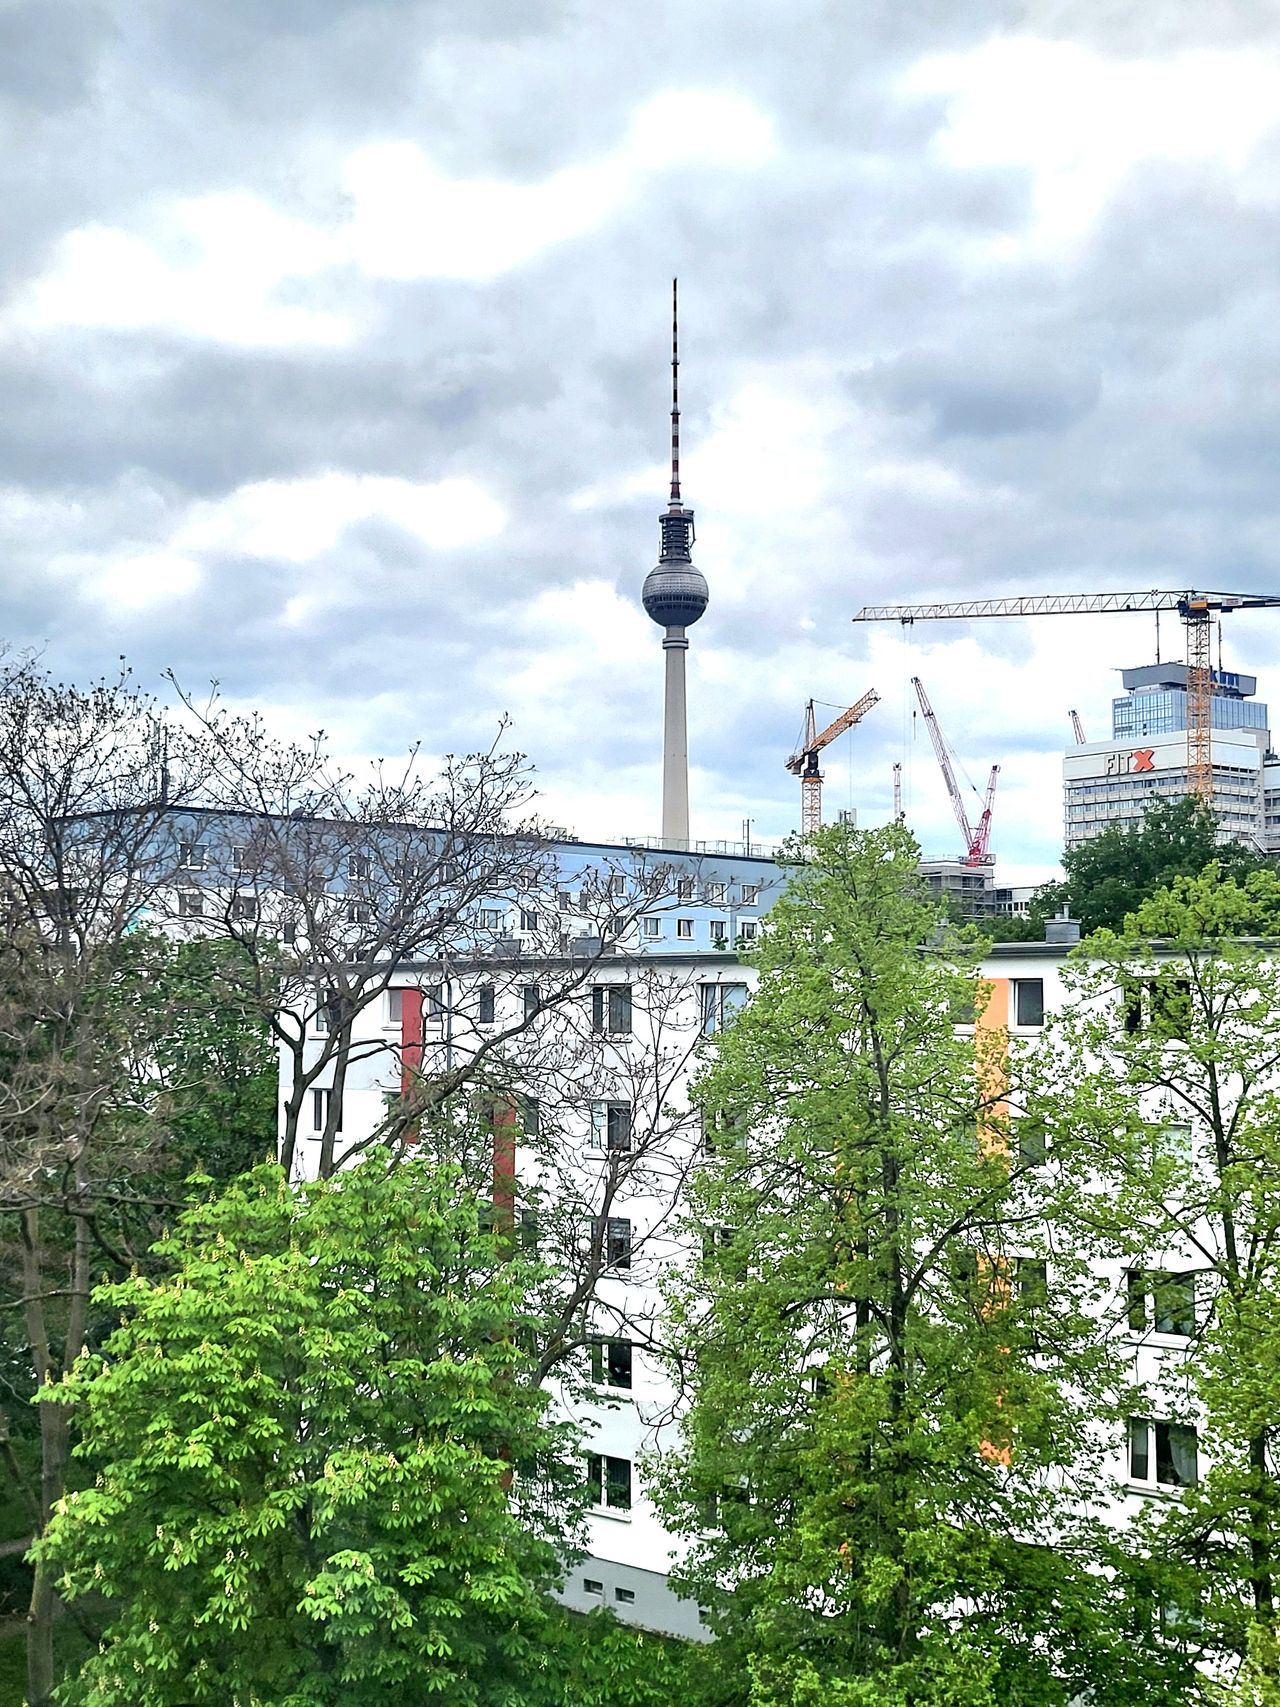 Near home in Mitte, View to the "Fernsehturm"